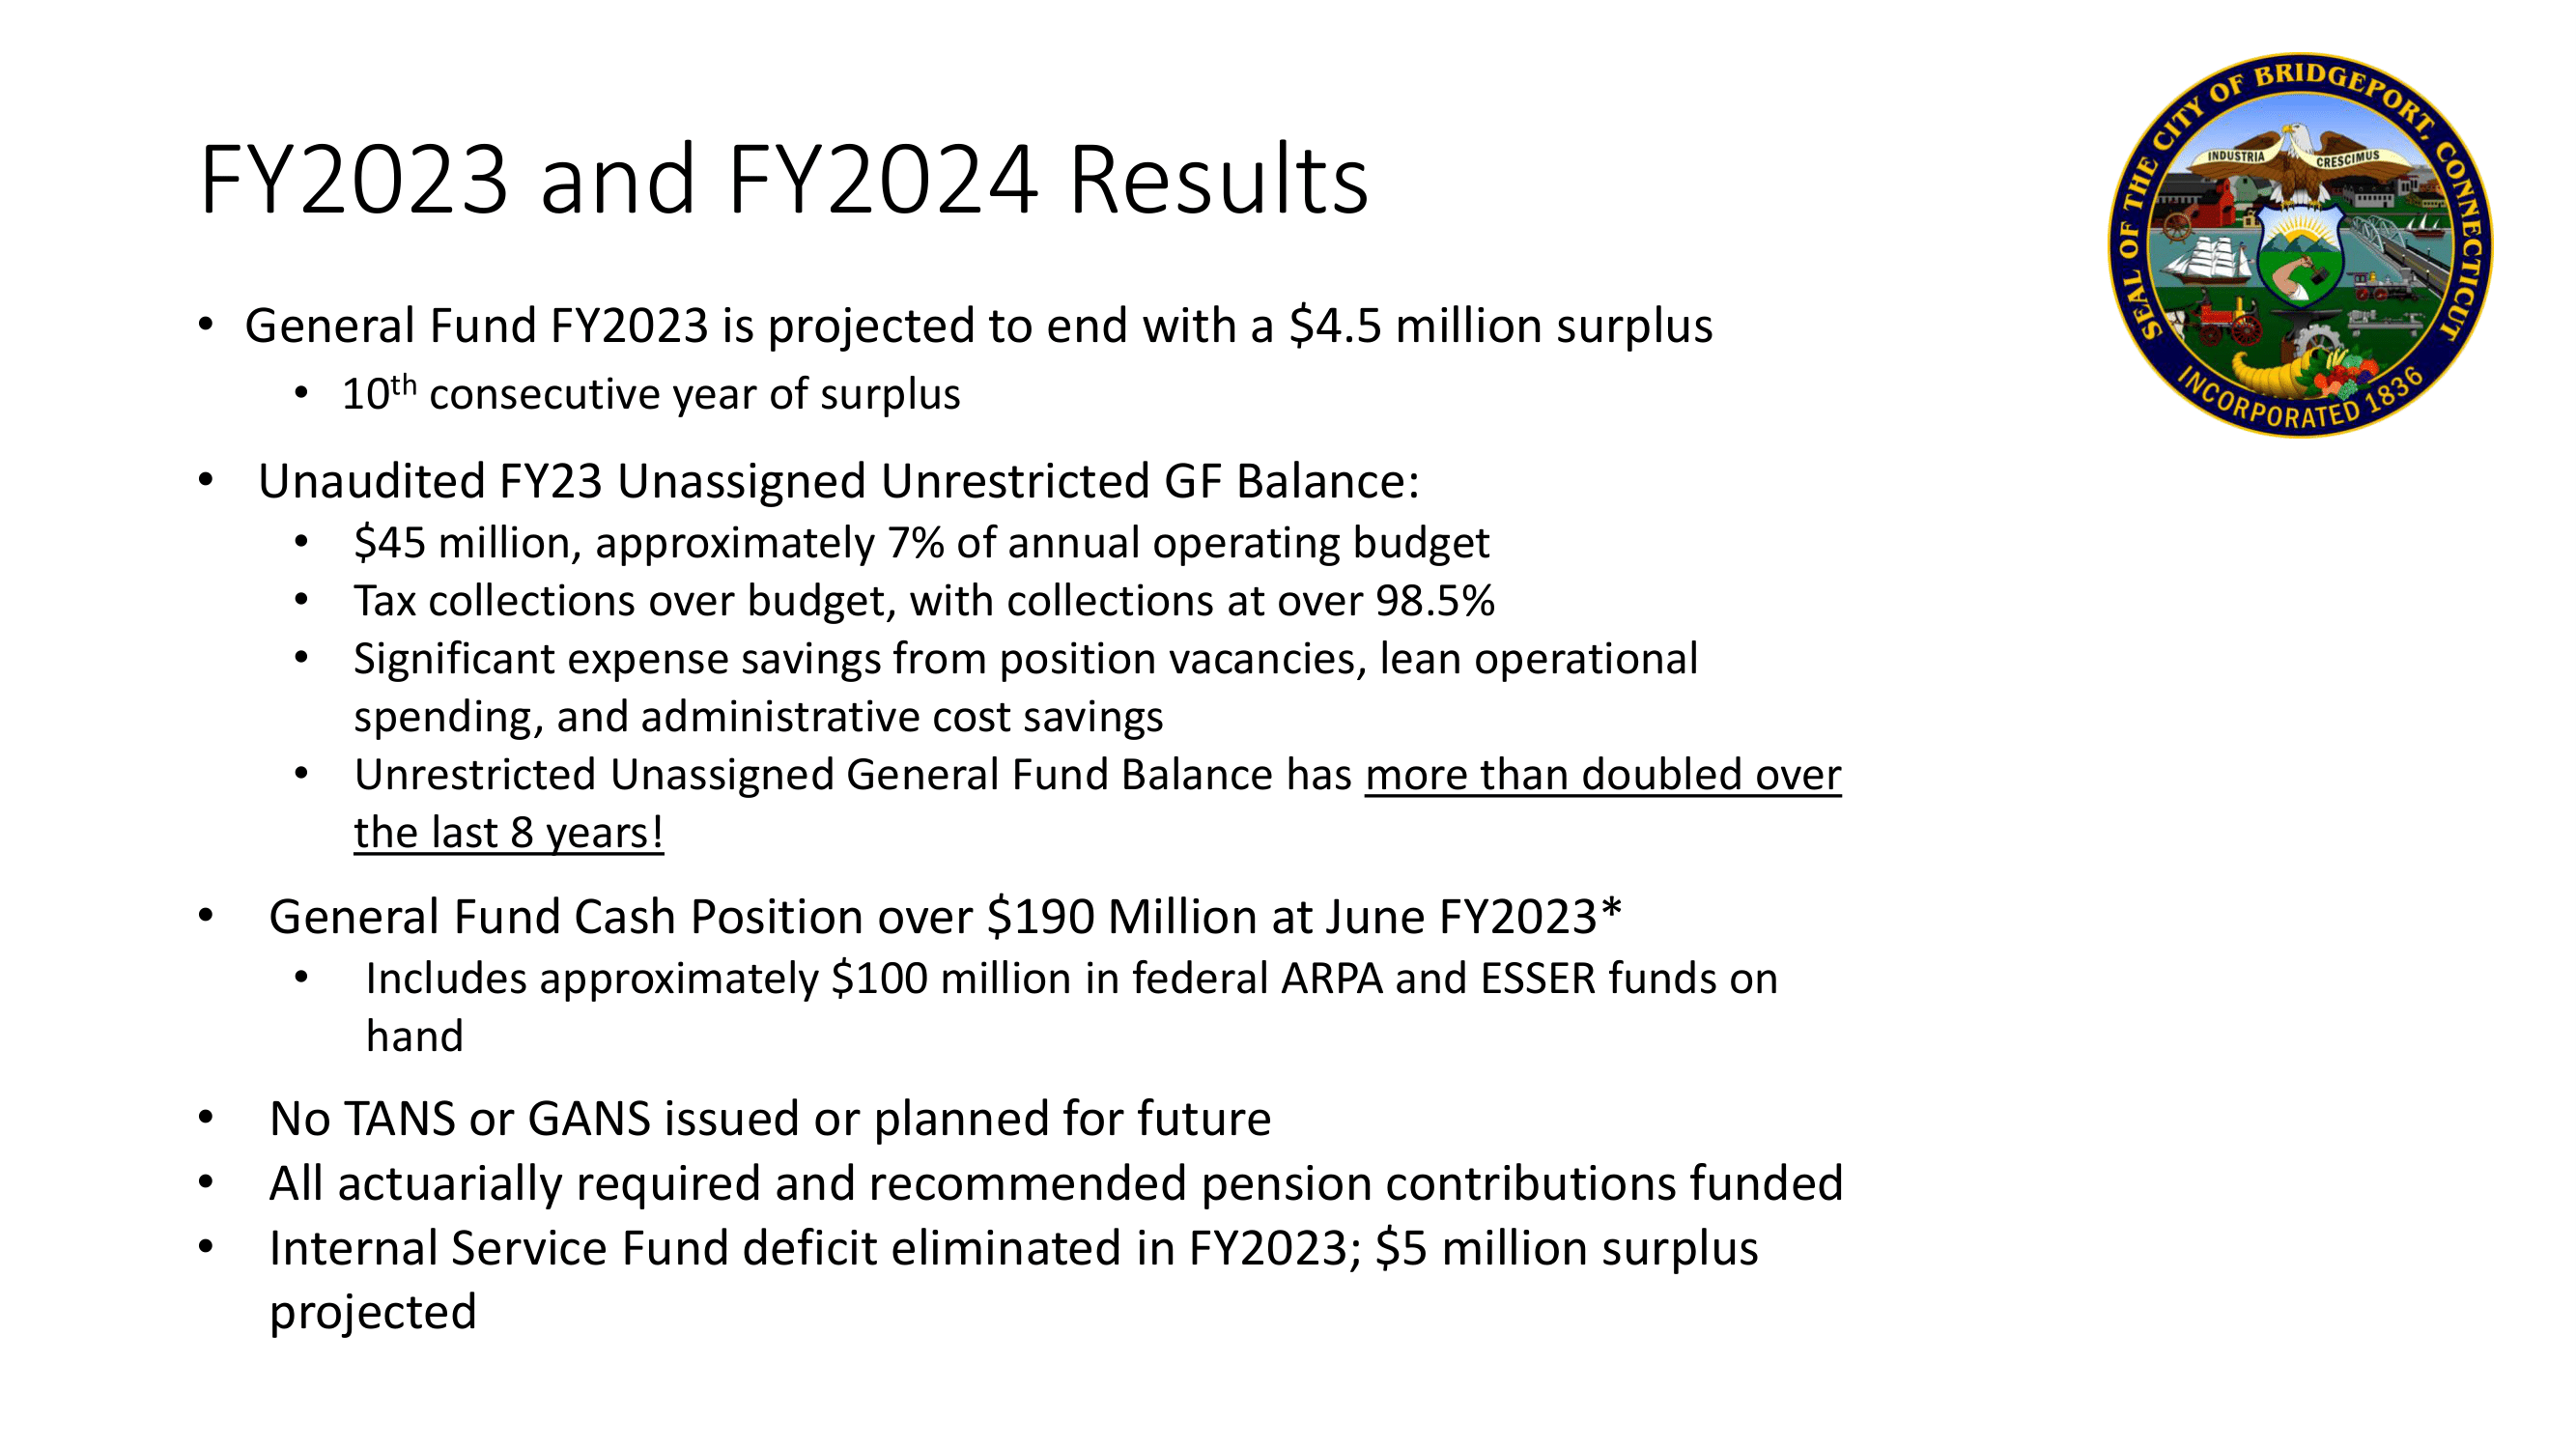 FY23/24 Results